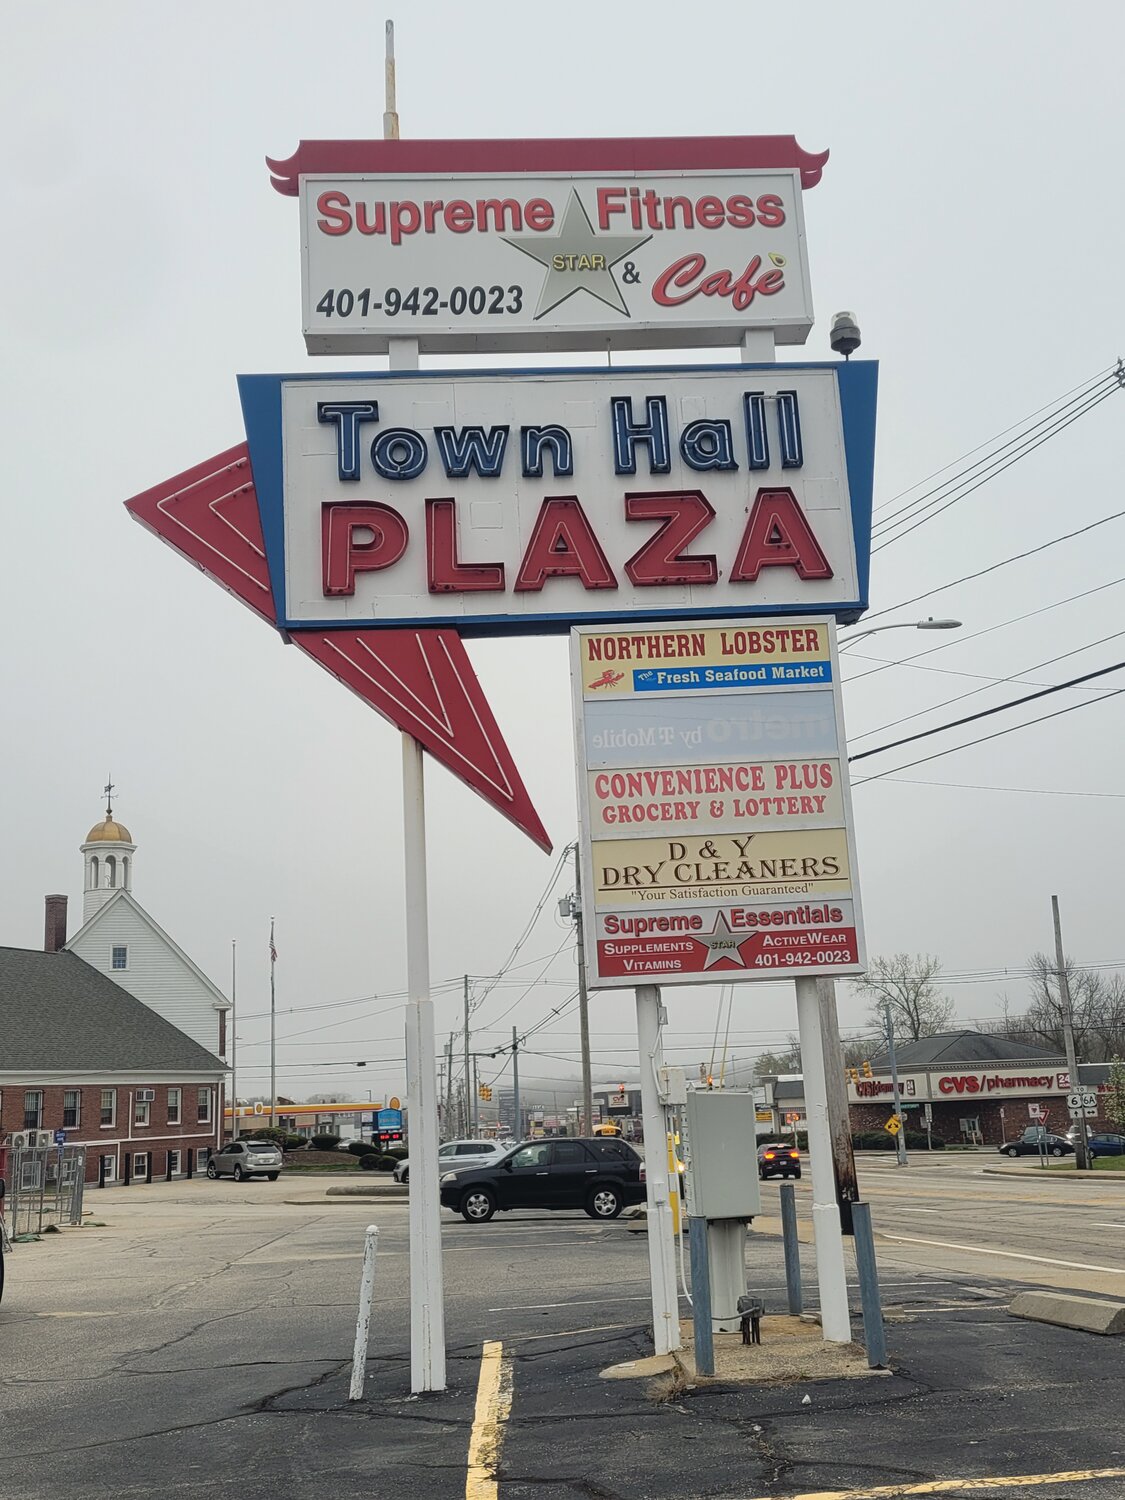 TOWN HALL PLAZA IN RUINS: One of the Grieco brothers is also tied to the refurbishment of the strip mall next to Johnston Town Hall (seen here in a photo taken several months ago), which formerly housed a gym, café and the Johnston Democratic Headquarters. The property has been fenced off for months; businesses closed. The fence-line perimeter was recently extended closer to Atwood Avenue. Robert Grieco confirmed the property was not directly owned by the auto group, but one of his brothers was involved with the project. He promised to have plans sent to the Johnston Sun Rise this week, but they did not arrive by press-time.